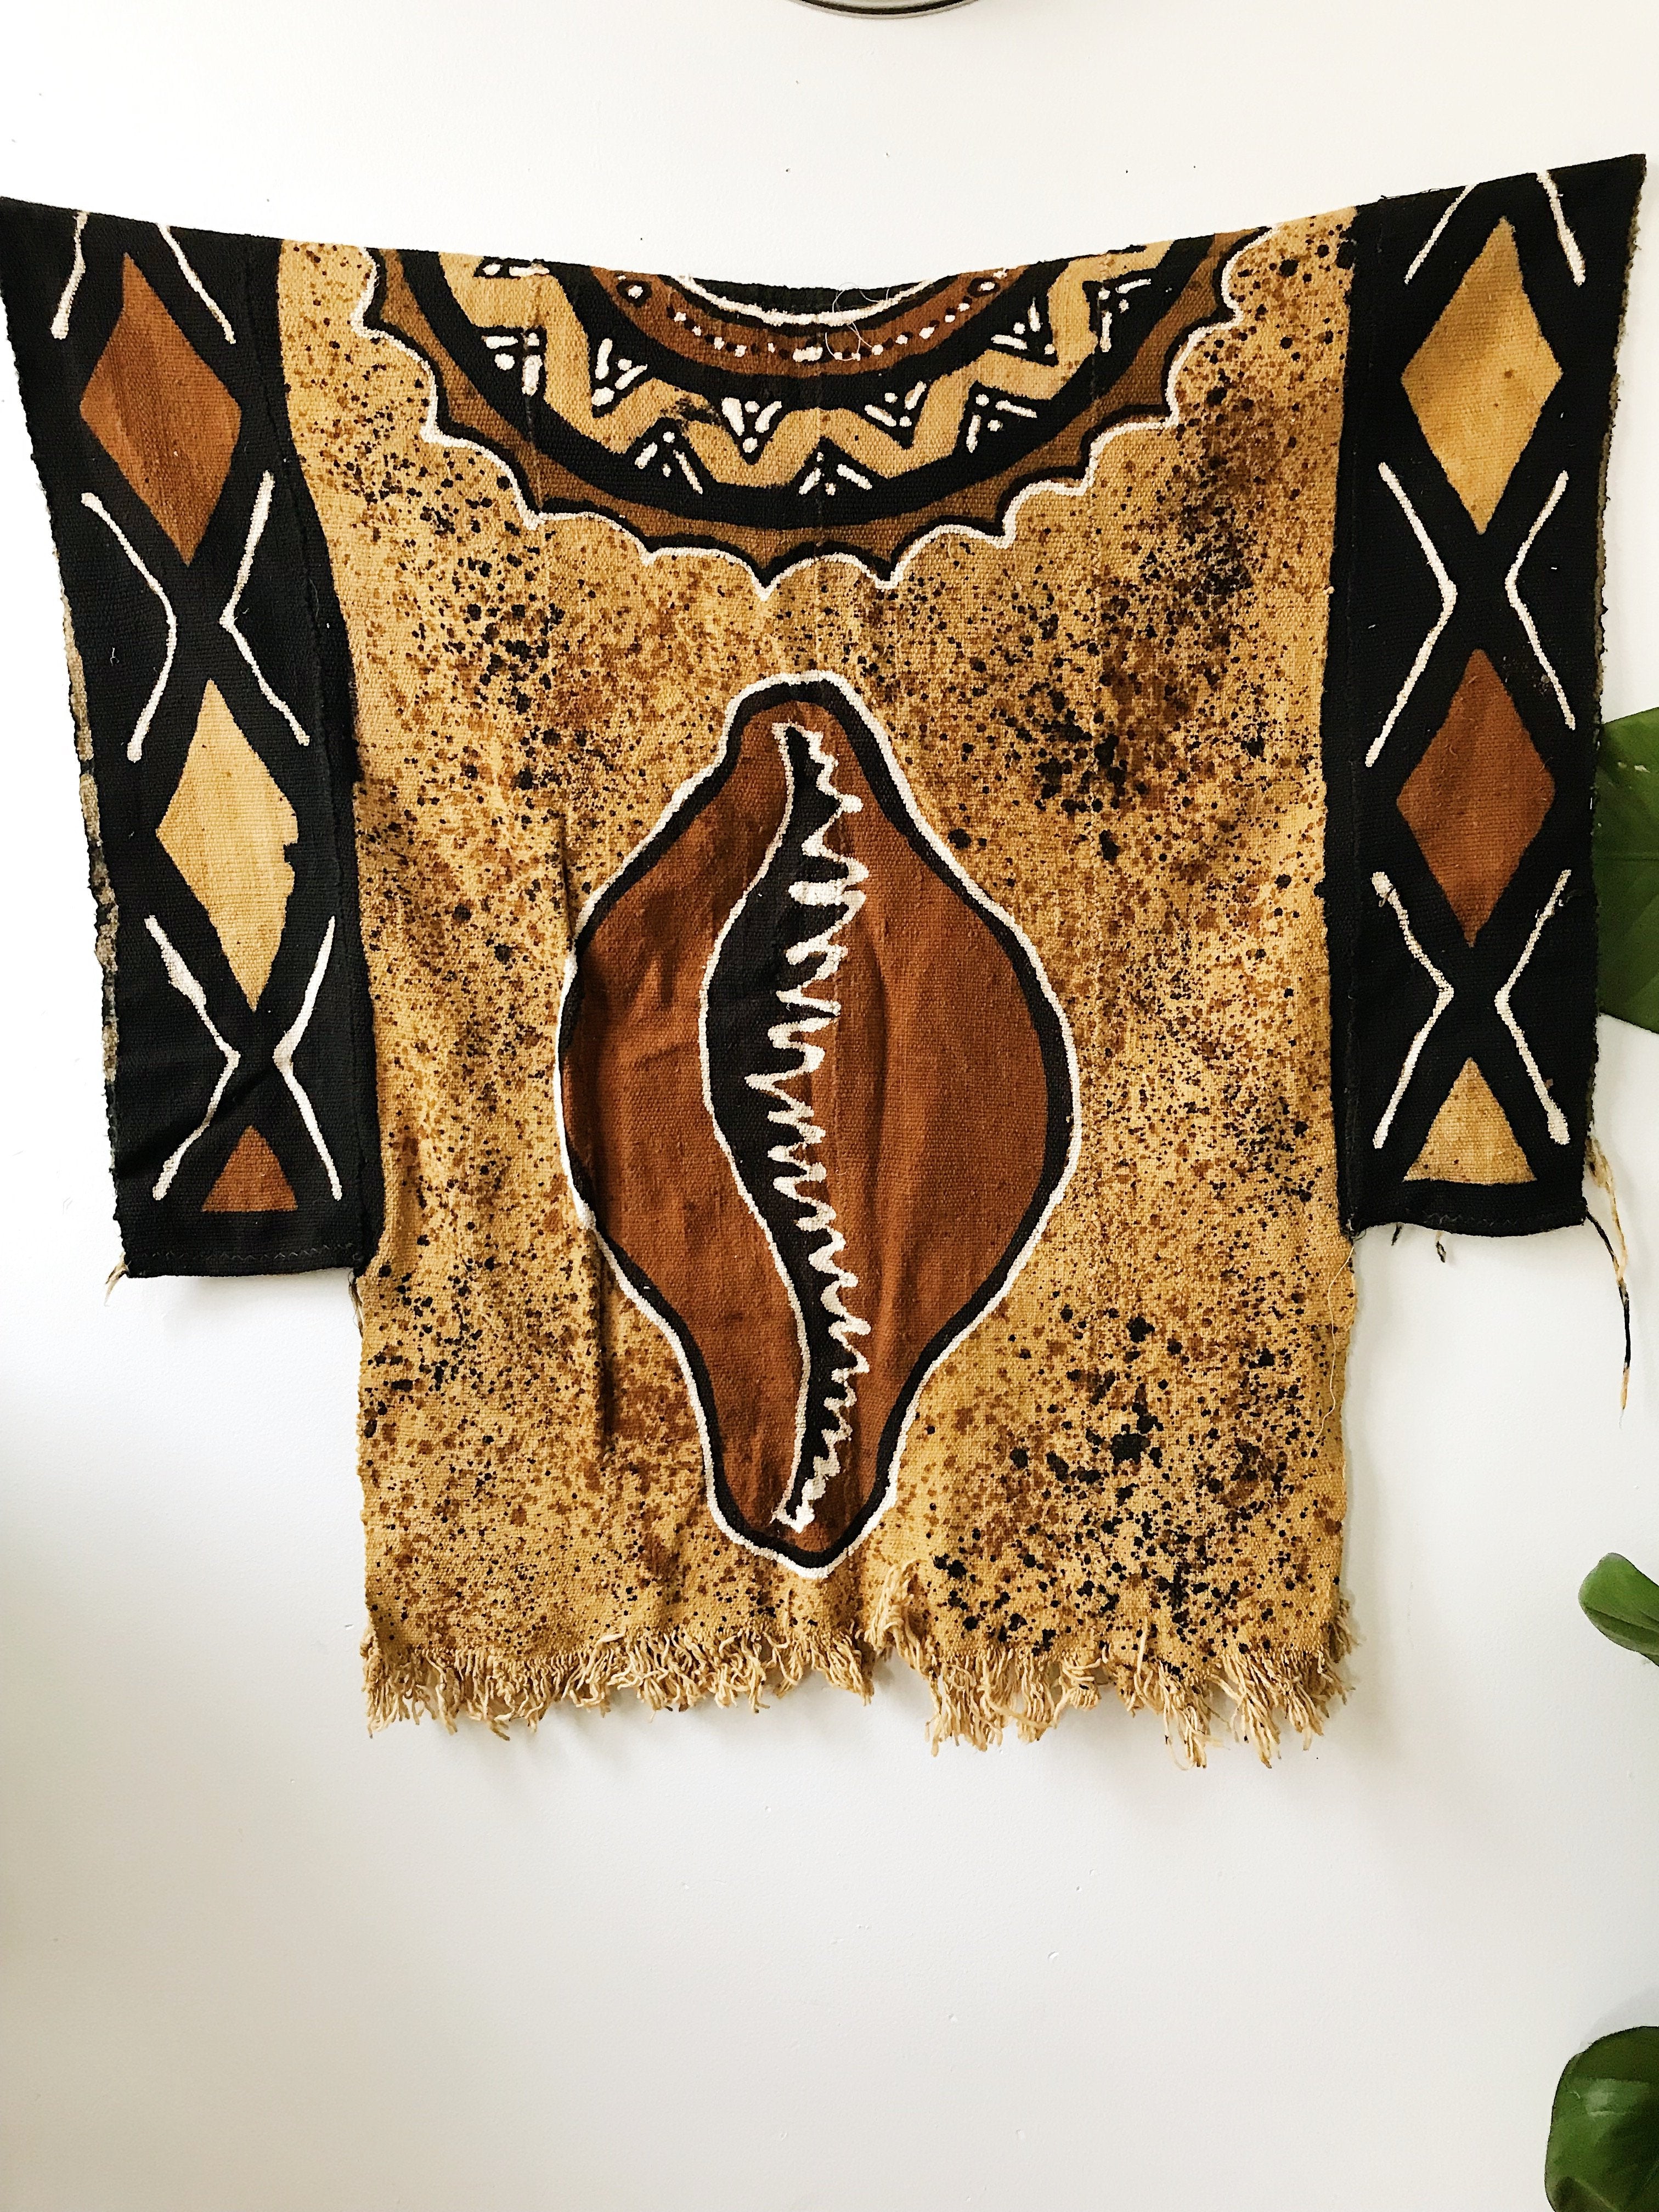 African Cowrie Shell Mudcloth Poncho